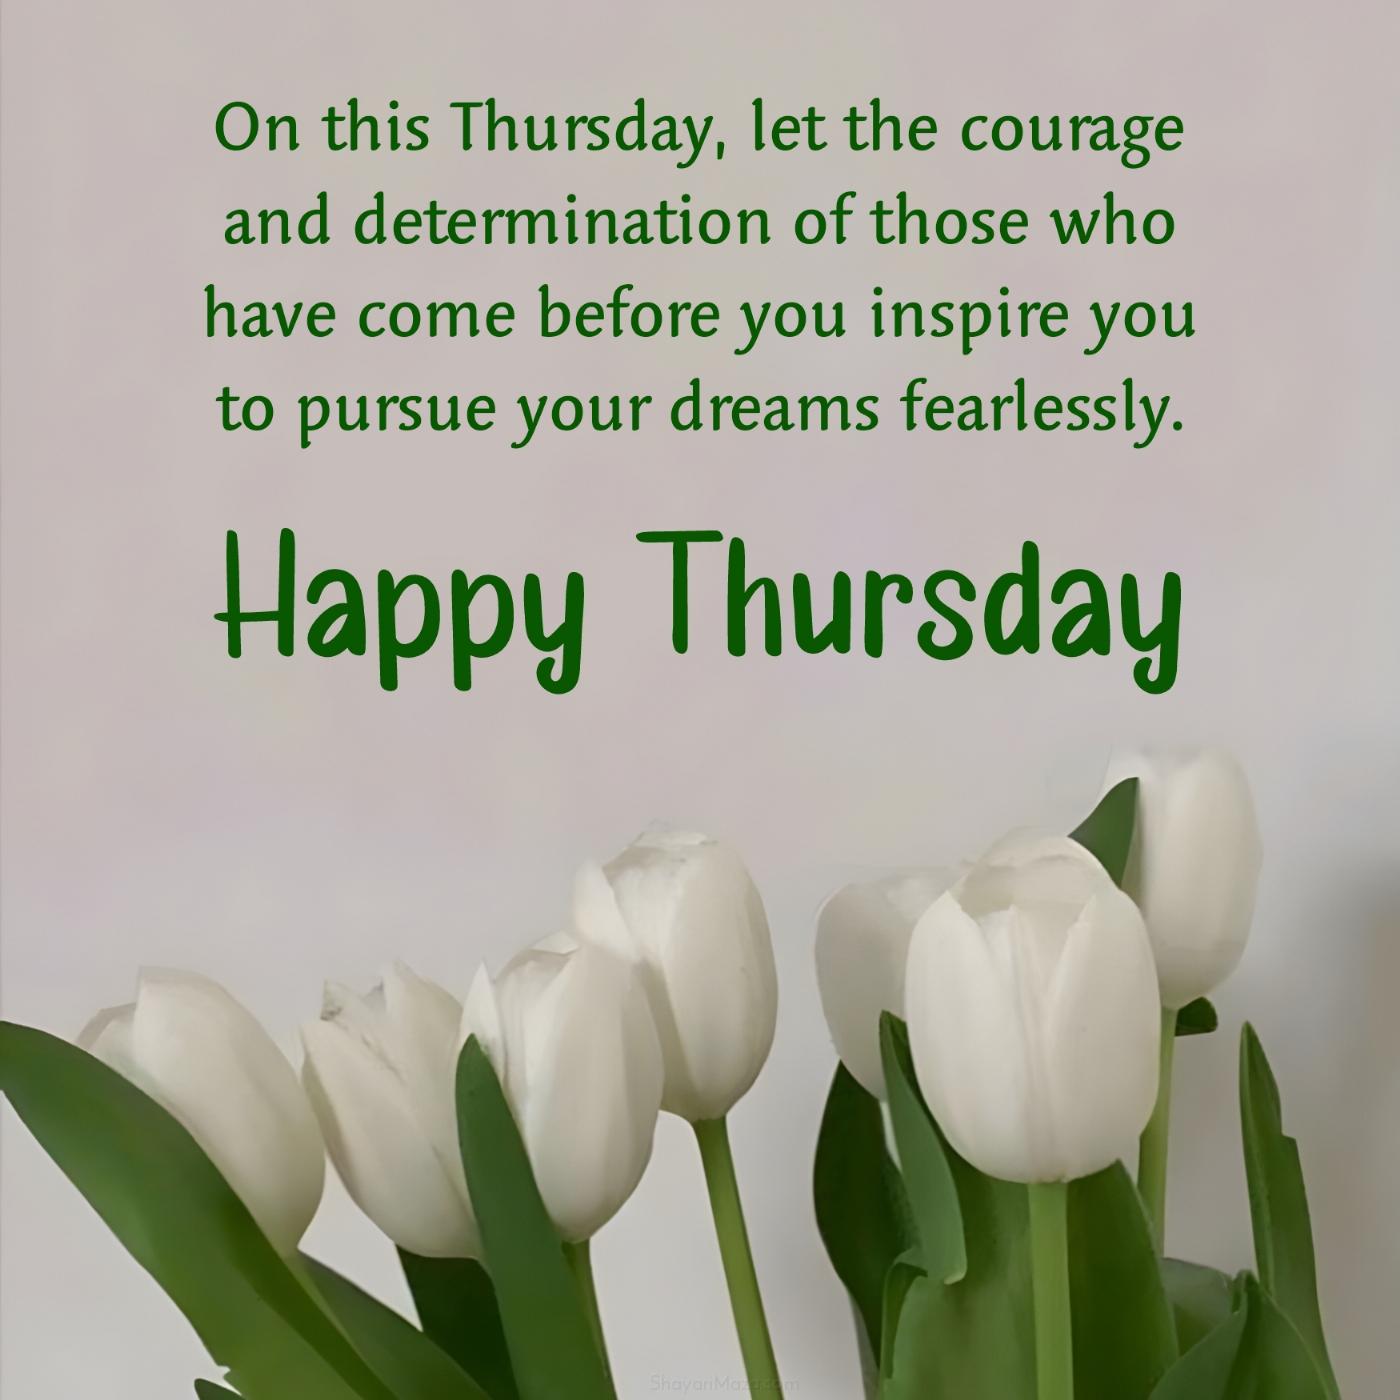 On this Thursday let the courage and determination of those